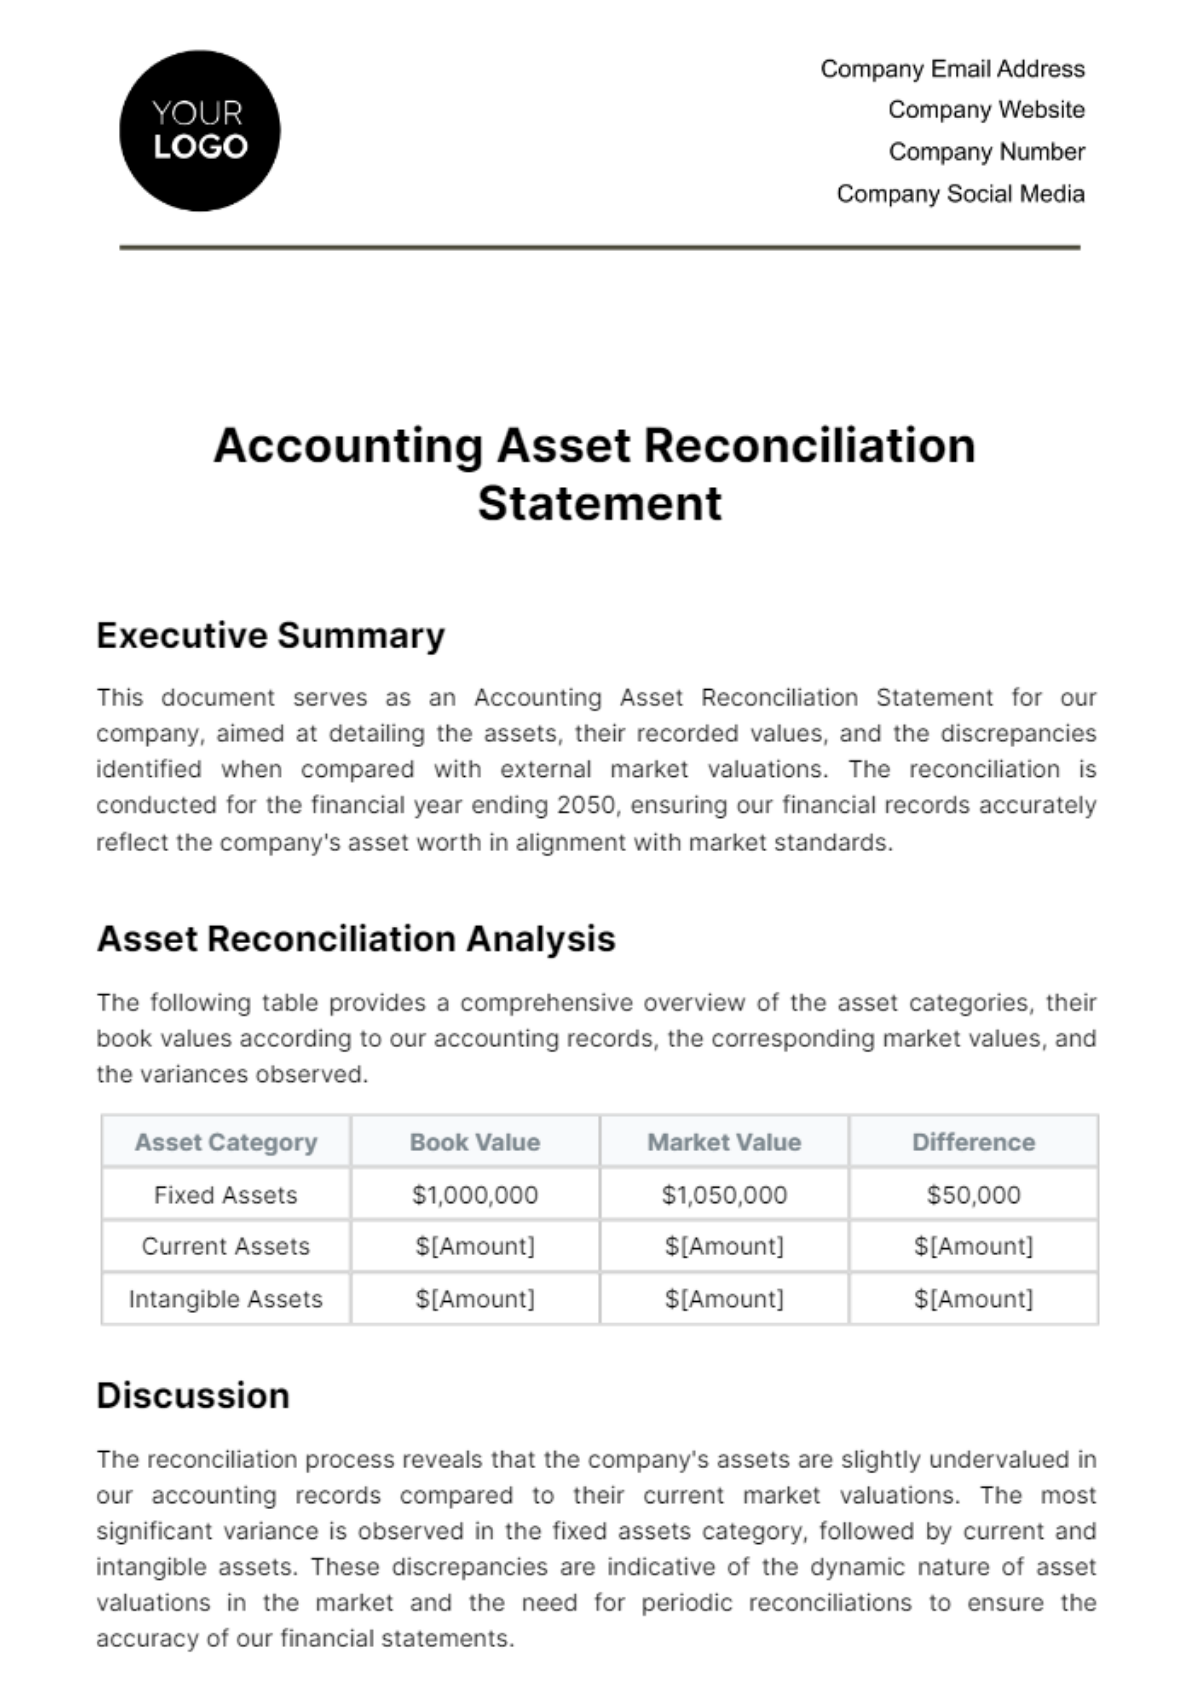 Accounting Asset Reconciliation Statement Template